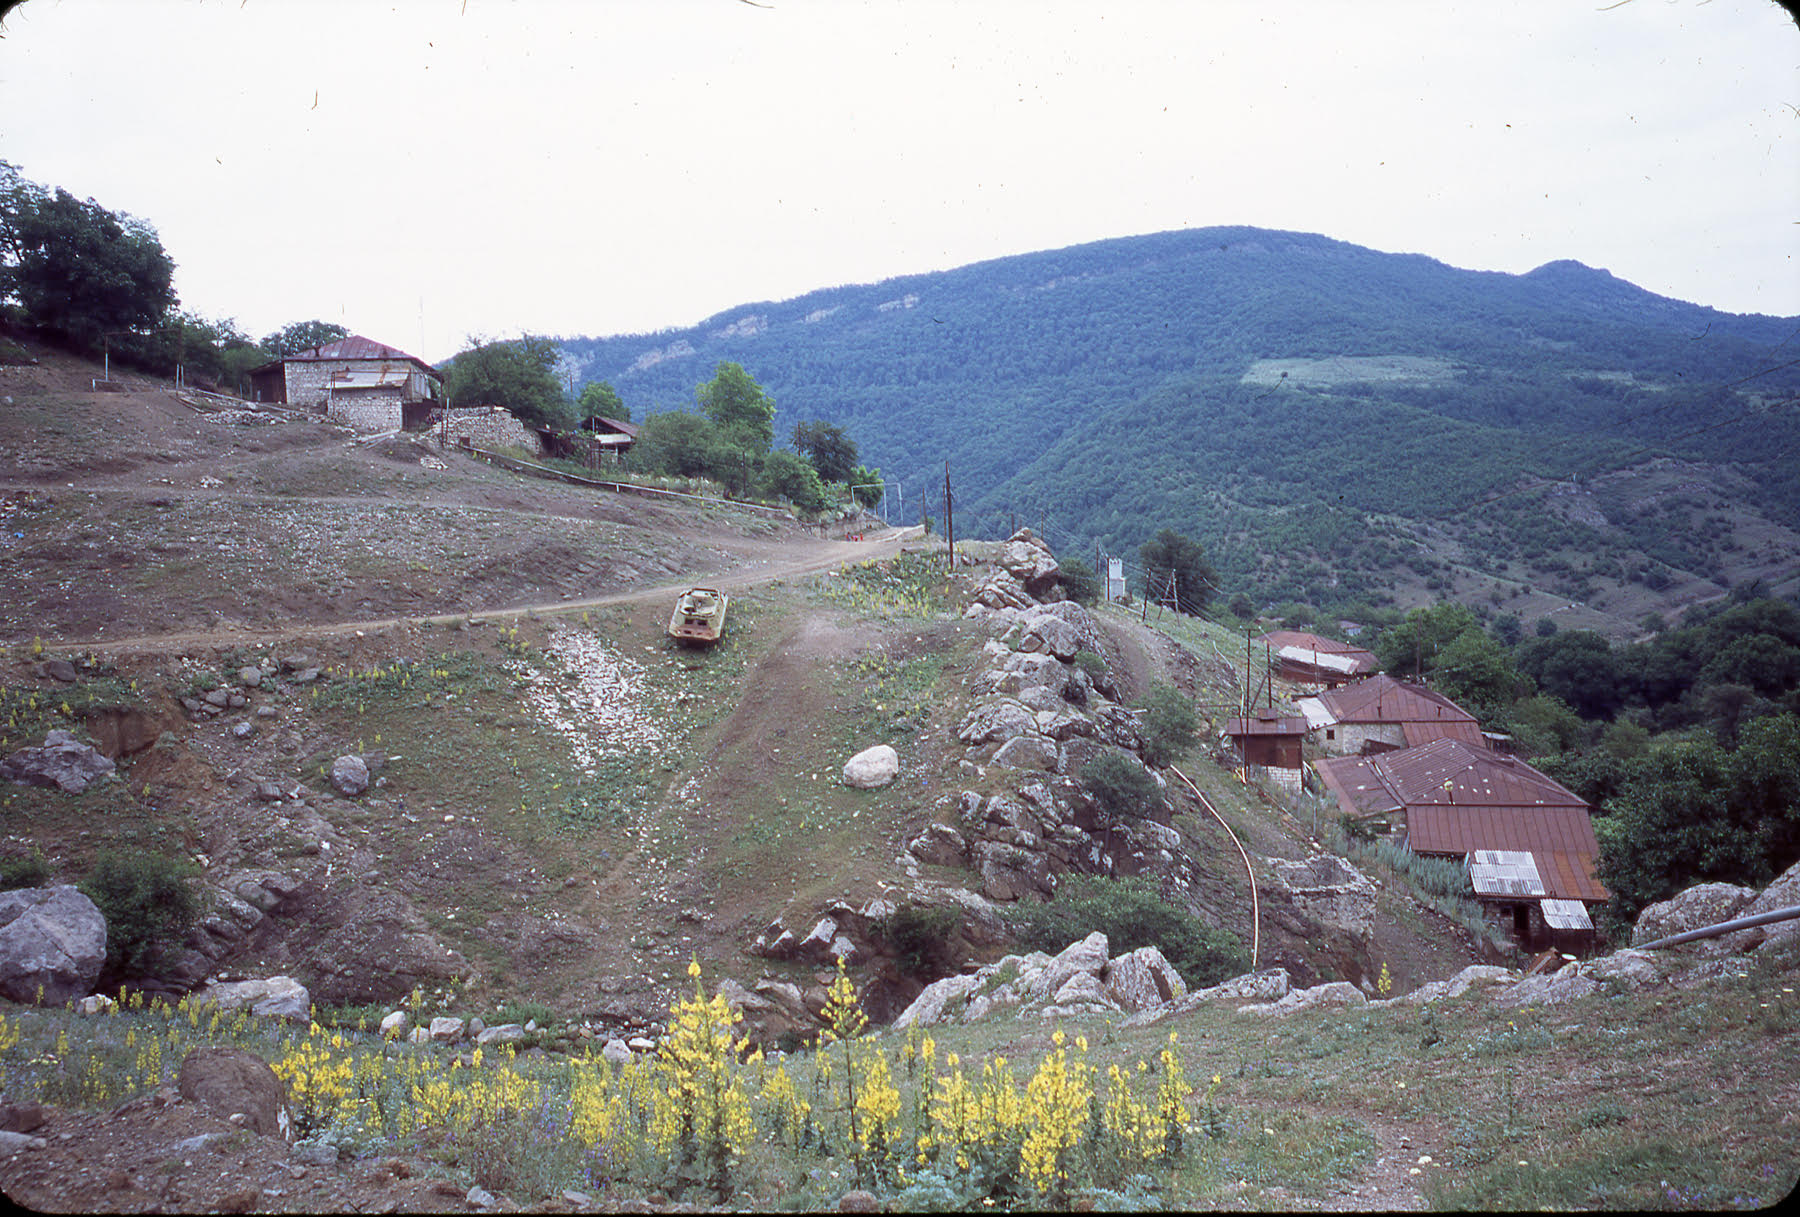 image from the film Black Bach Artsakh (2021), a tank is parked in the middle distance on the side of a hill, it is incongruous in a peaceful rural setting